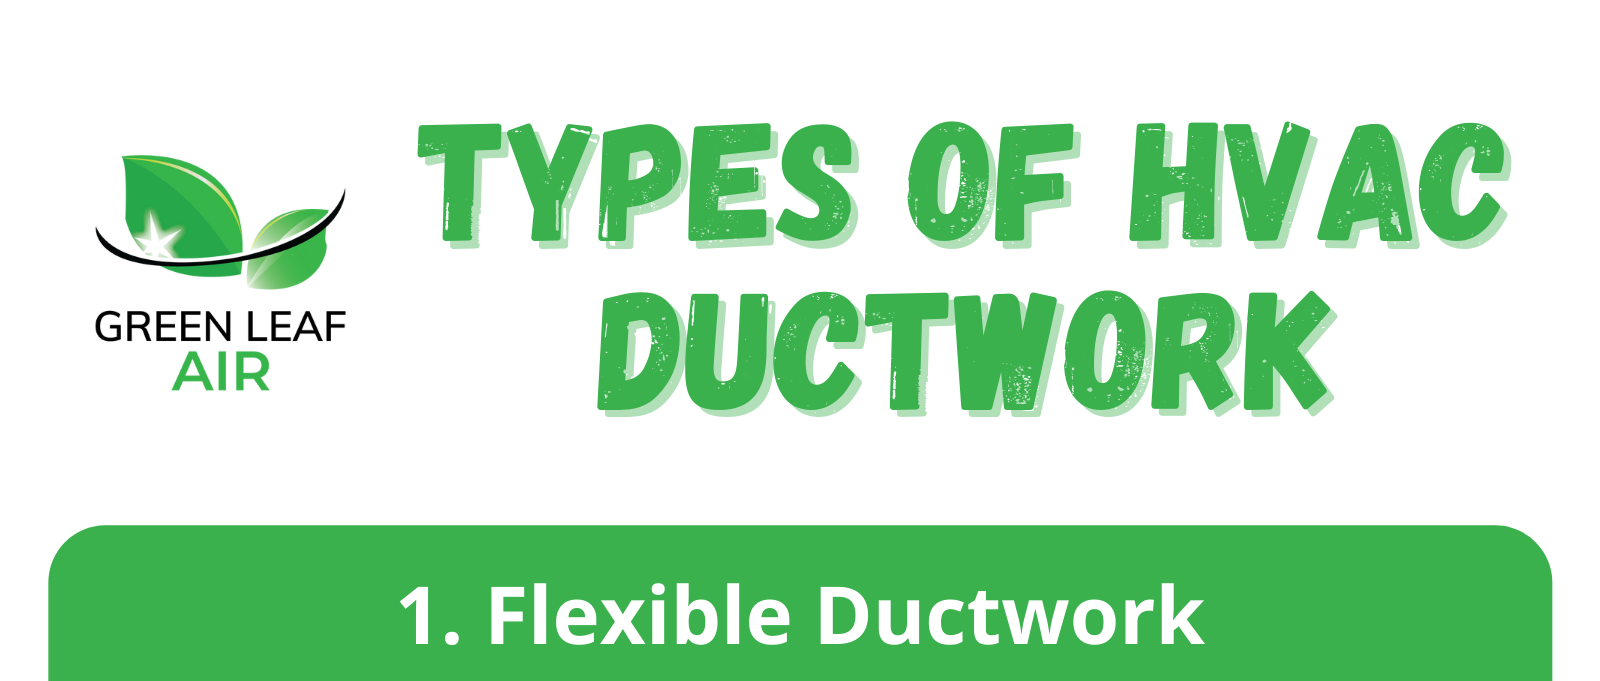 Types of HVAC Ductwork